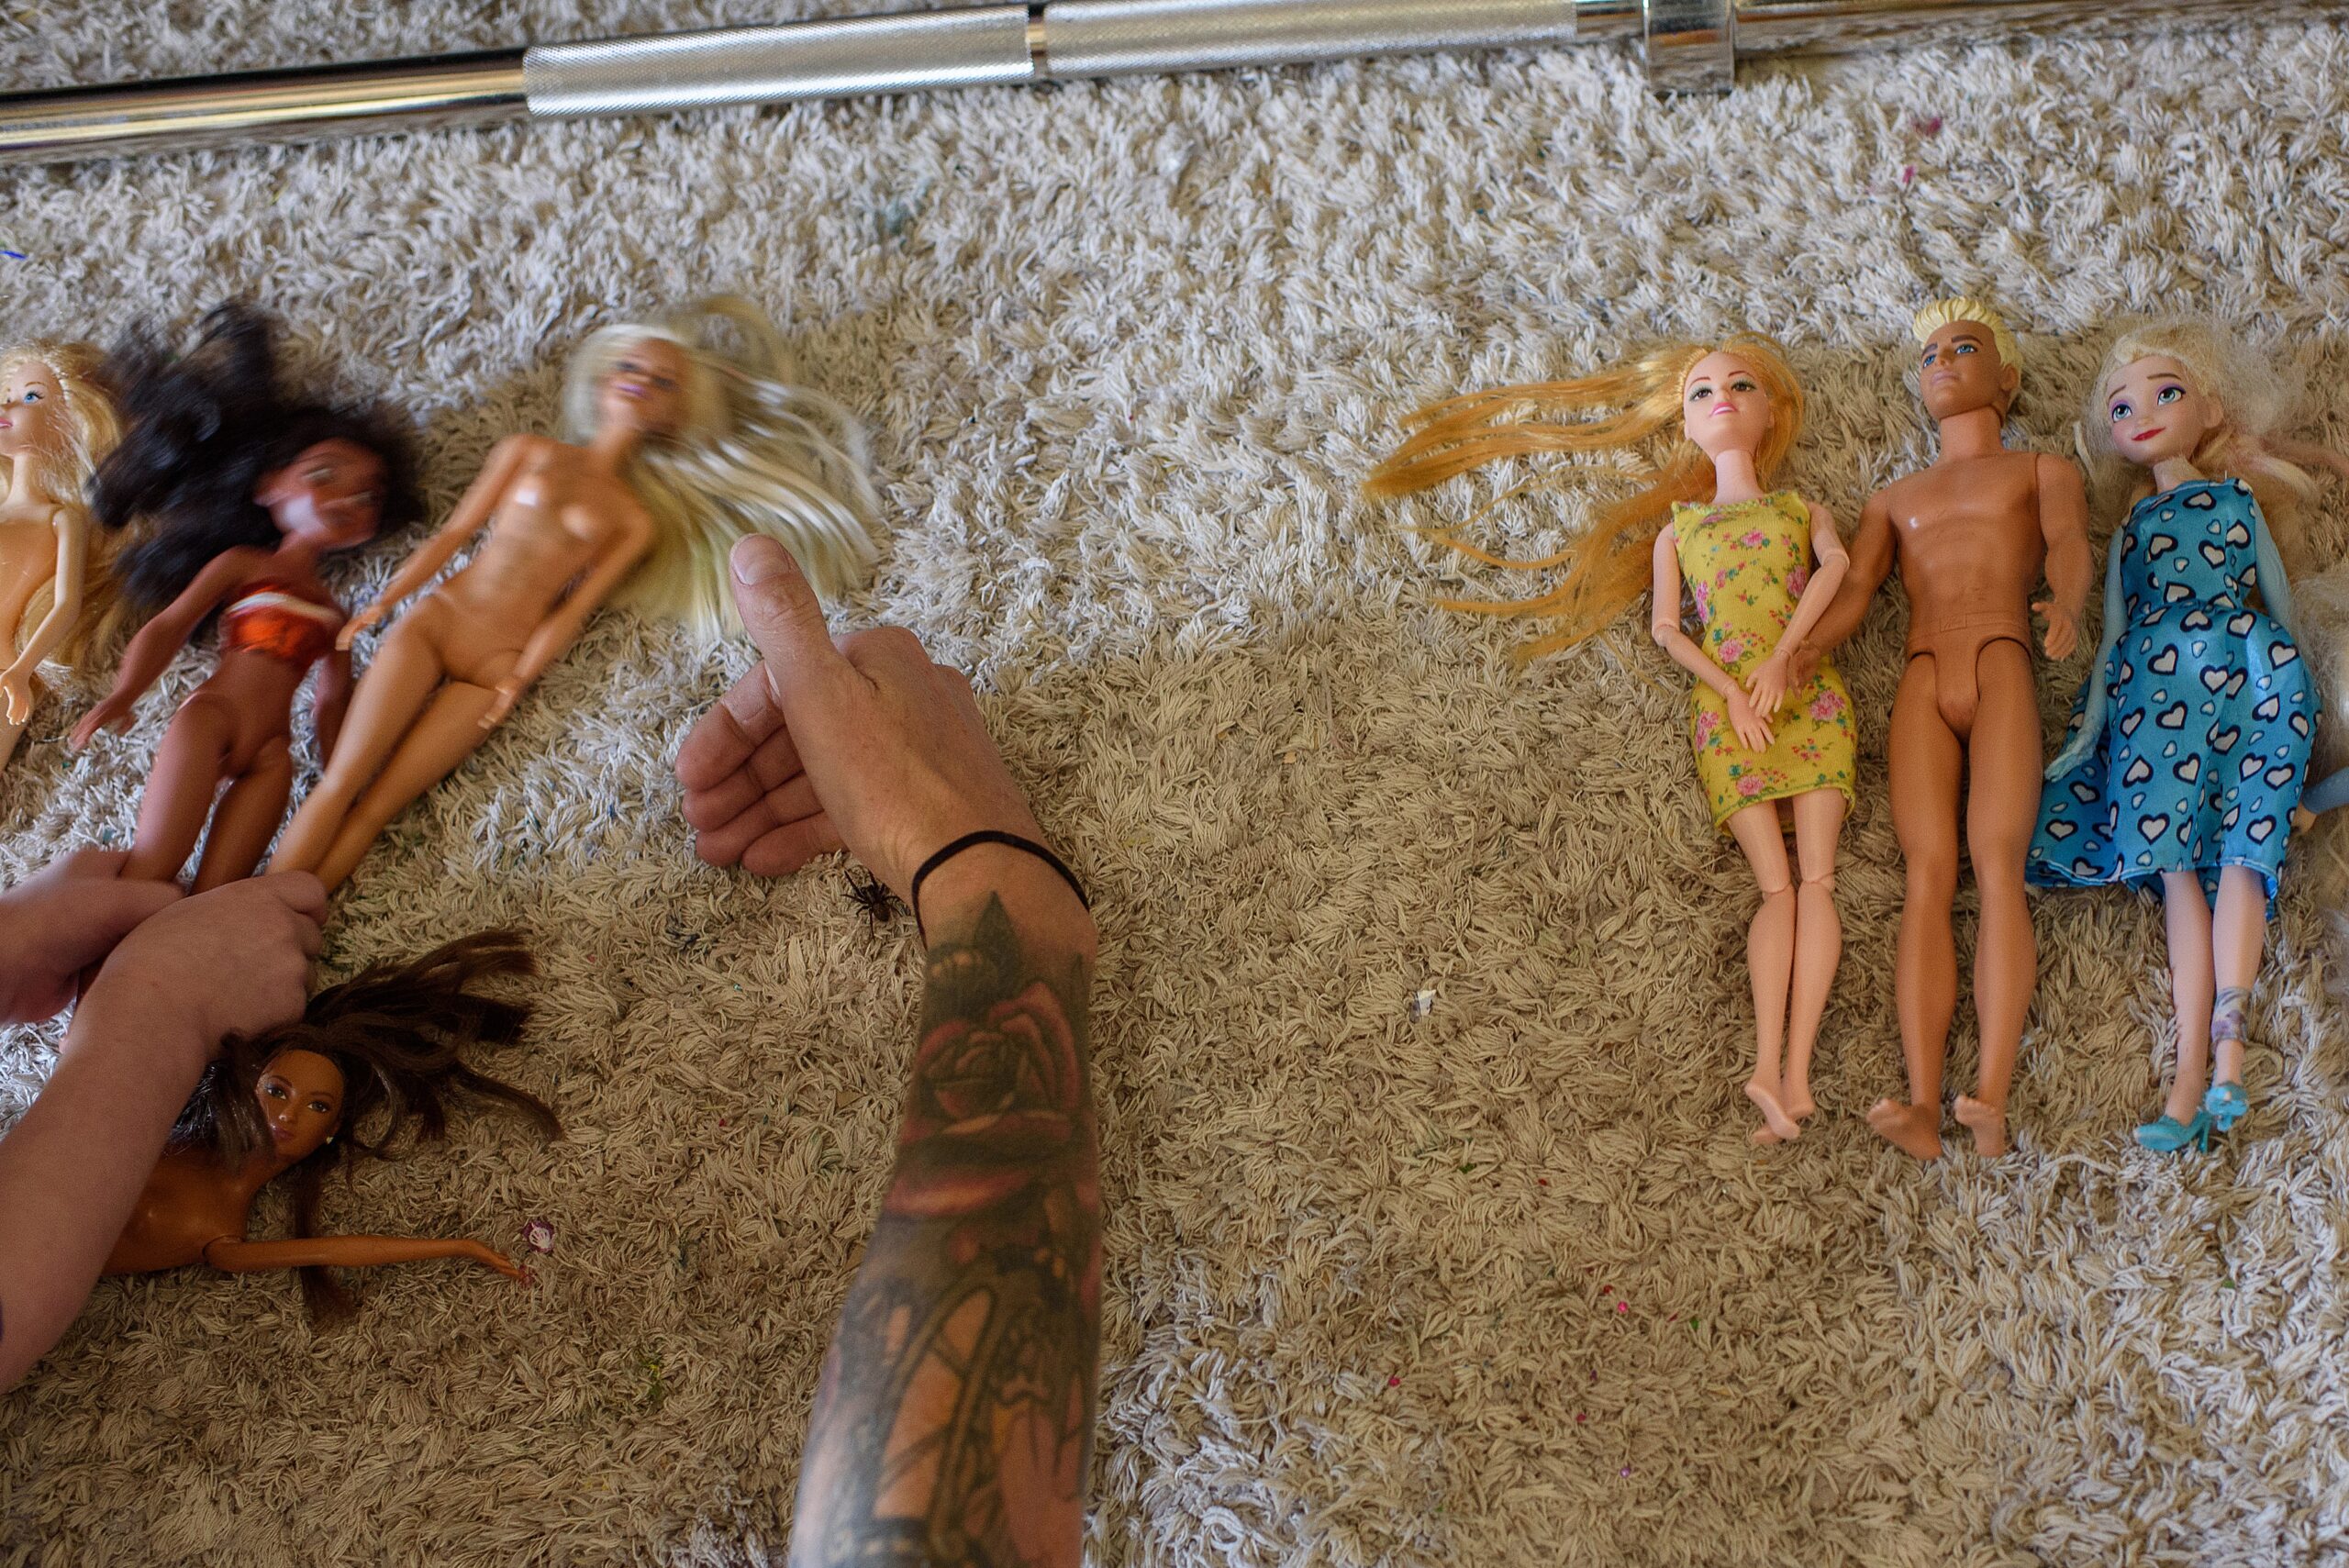 A detail image of a father picking up a spider to release outside while his daughter rescues her Barbie's from it.